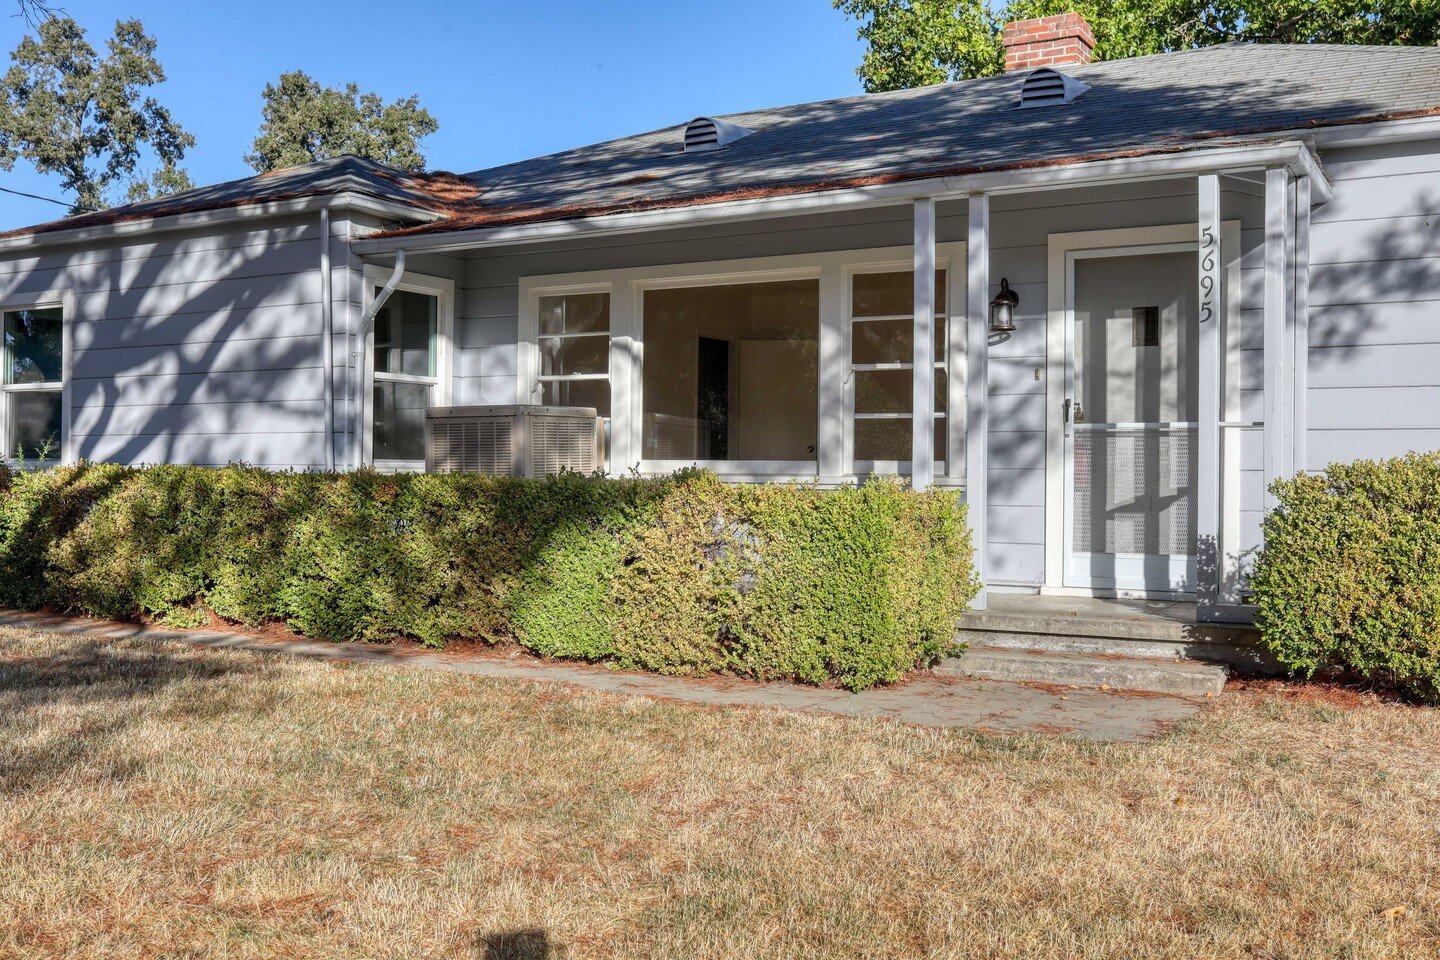 New Listing!

5695 Rosario Avenue | Atascadero, CA 93422

Unique opportunity to own 3 separate houses on over 1/3 of an acre with expansive views over the City. The 3 bedroom, 2 bath, main home features original hardwood floors, coved ceilings, nosta